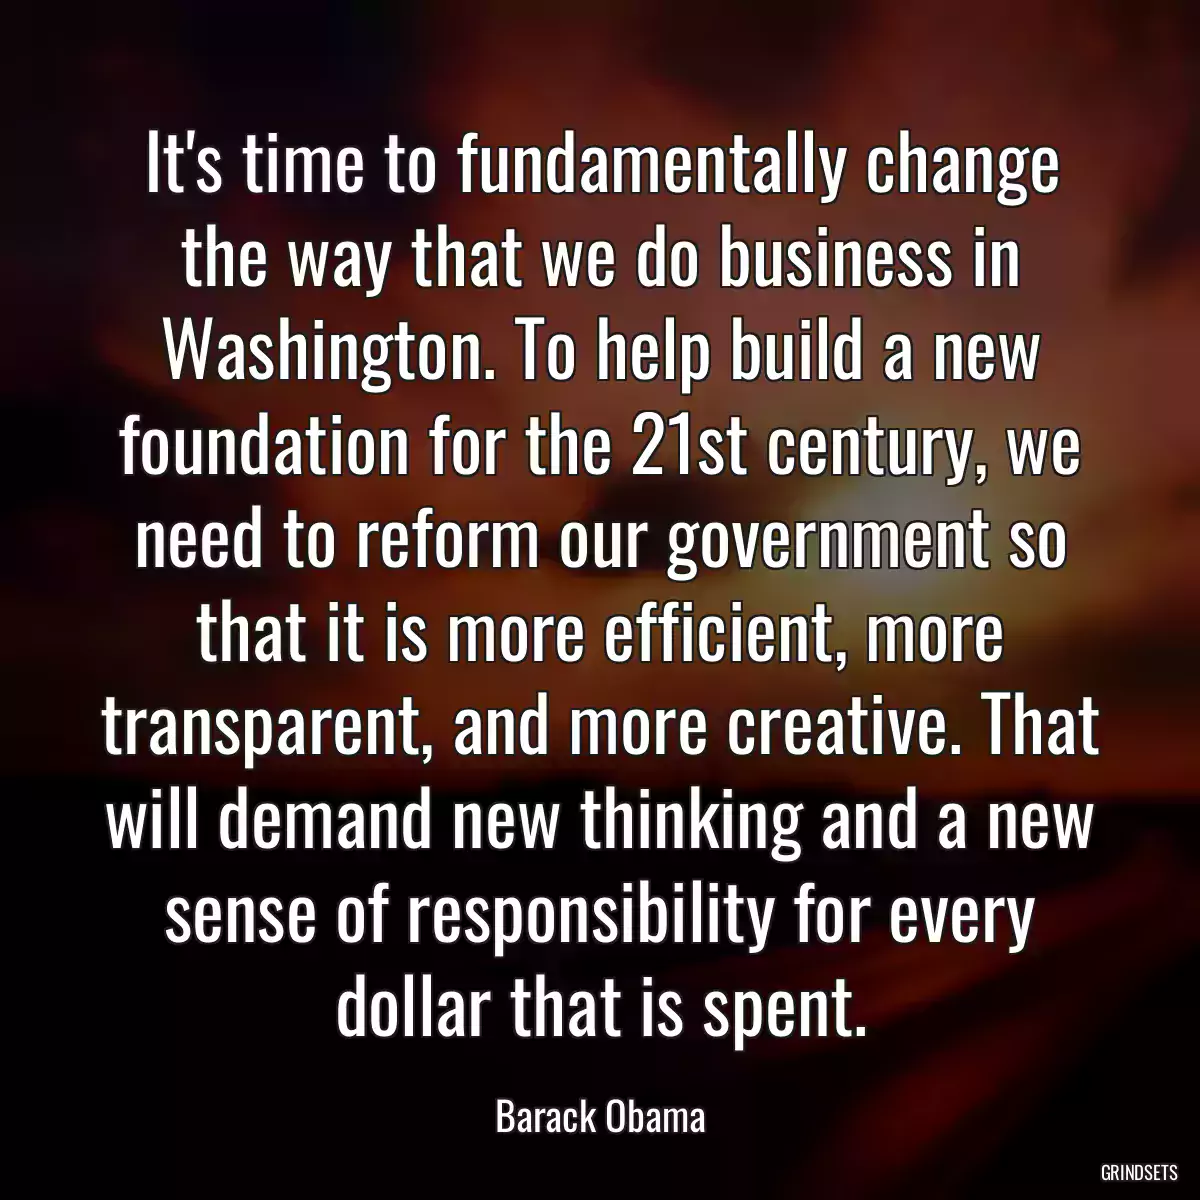 It\'s time to fundamentally change the way that we do business in Washington. To help build a new foundation for the 21st century, we need to reform our government so that it is more efficient, more transparent, and more creative. That will demand new thinking and a new sense of responsibility for every dollar that is spent.